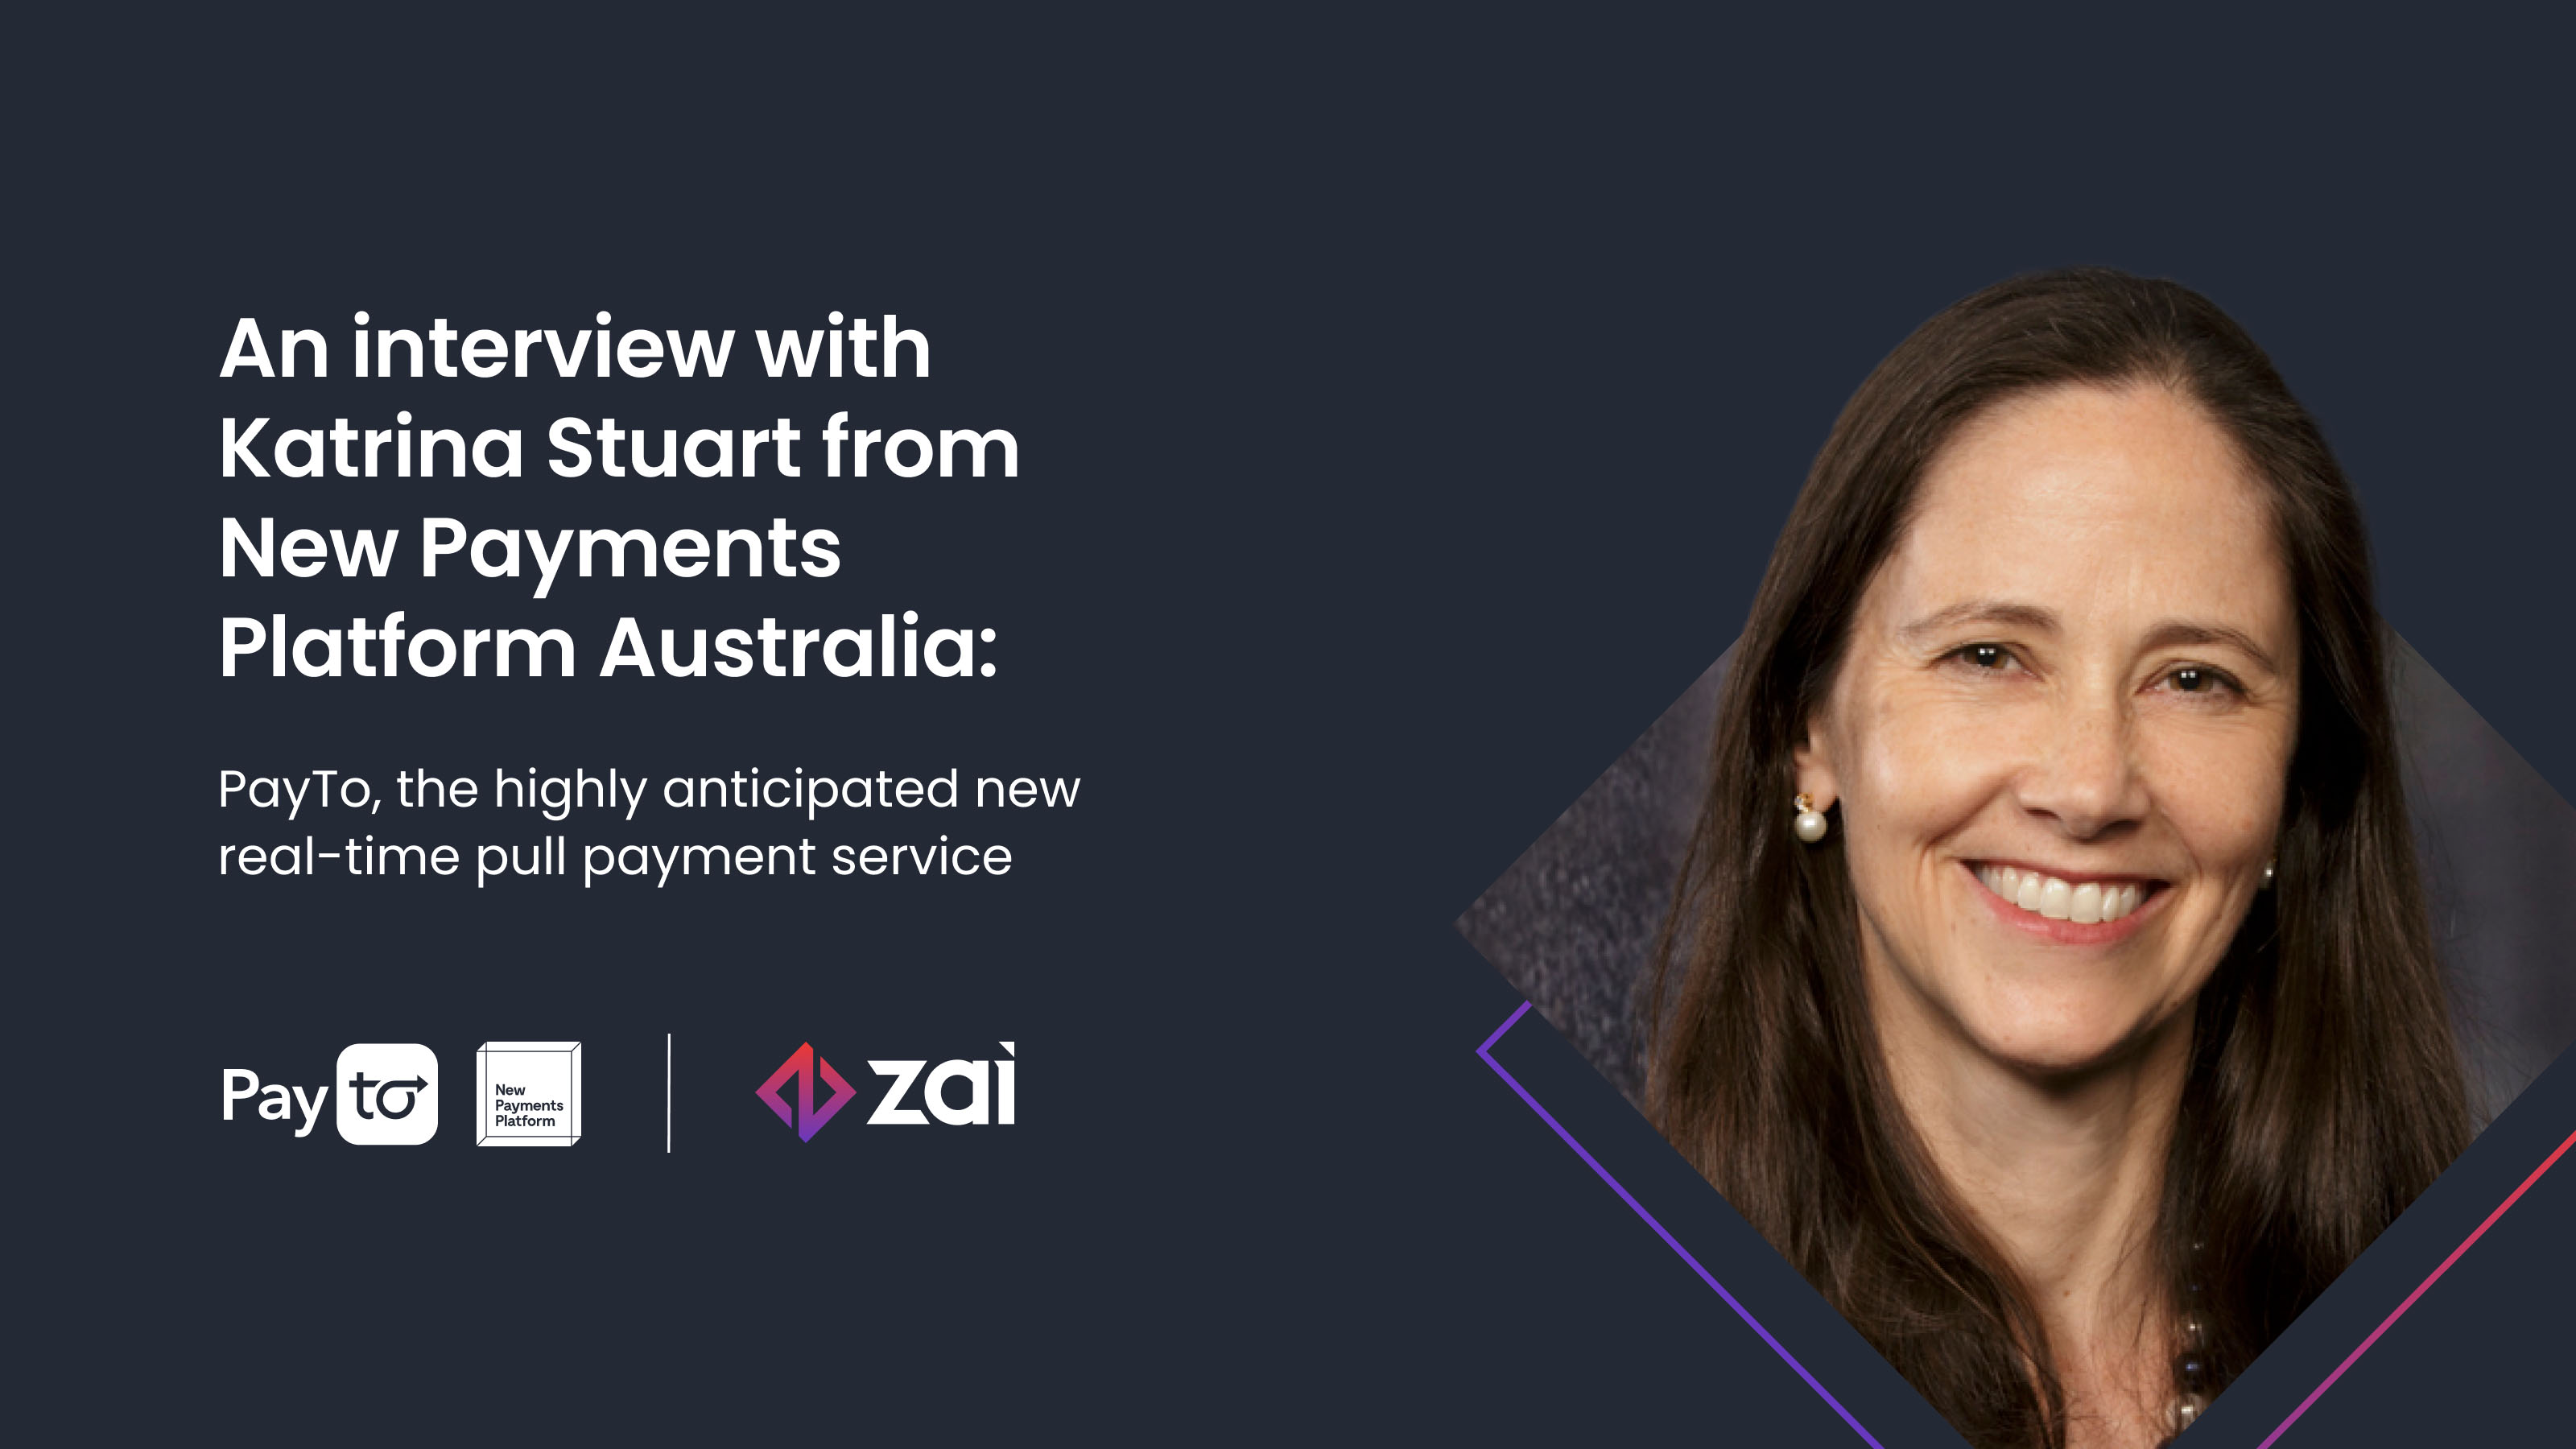 PayTo – an interview with New Payments Platform Australia